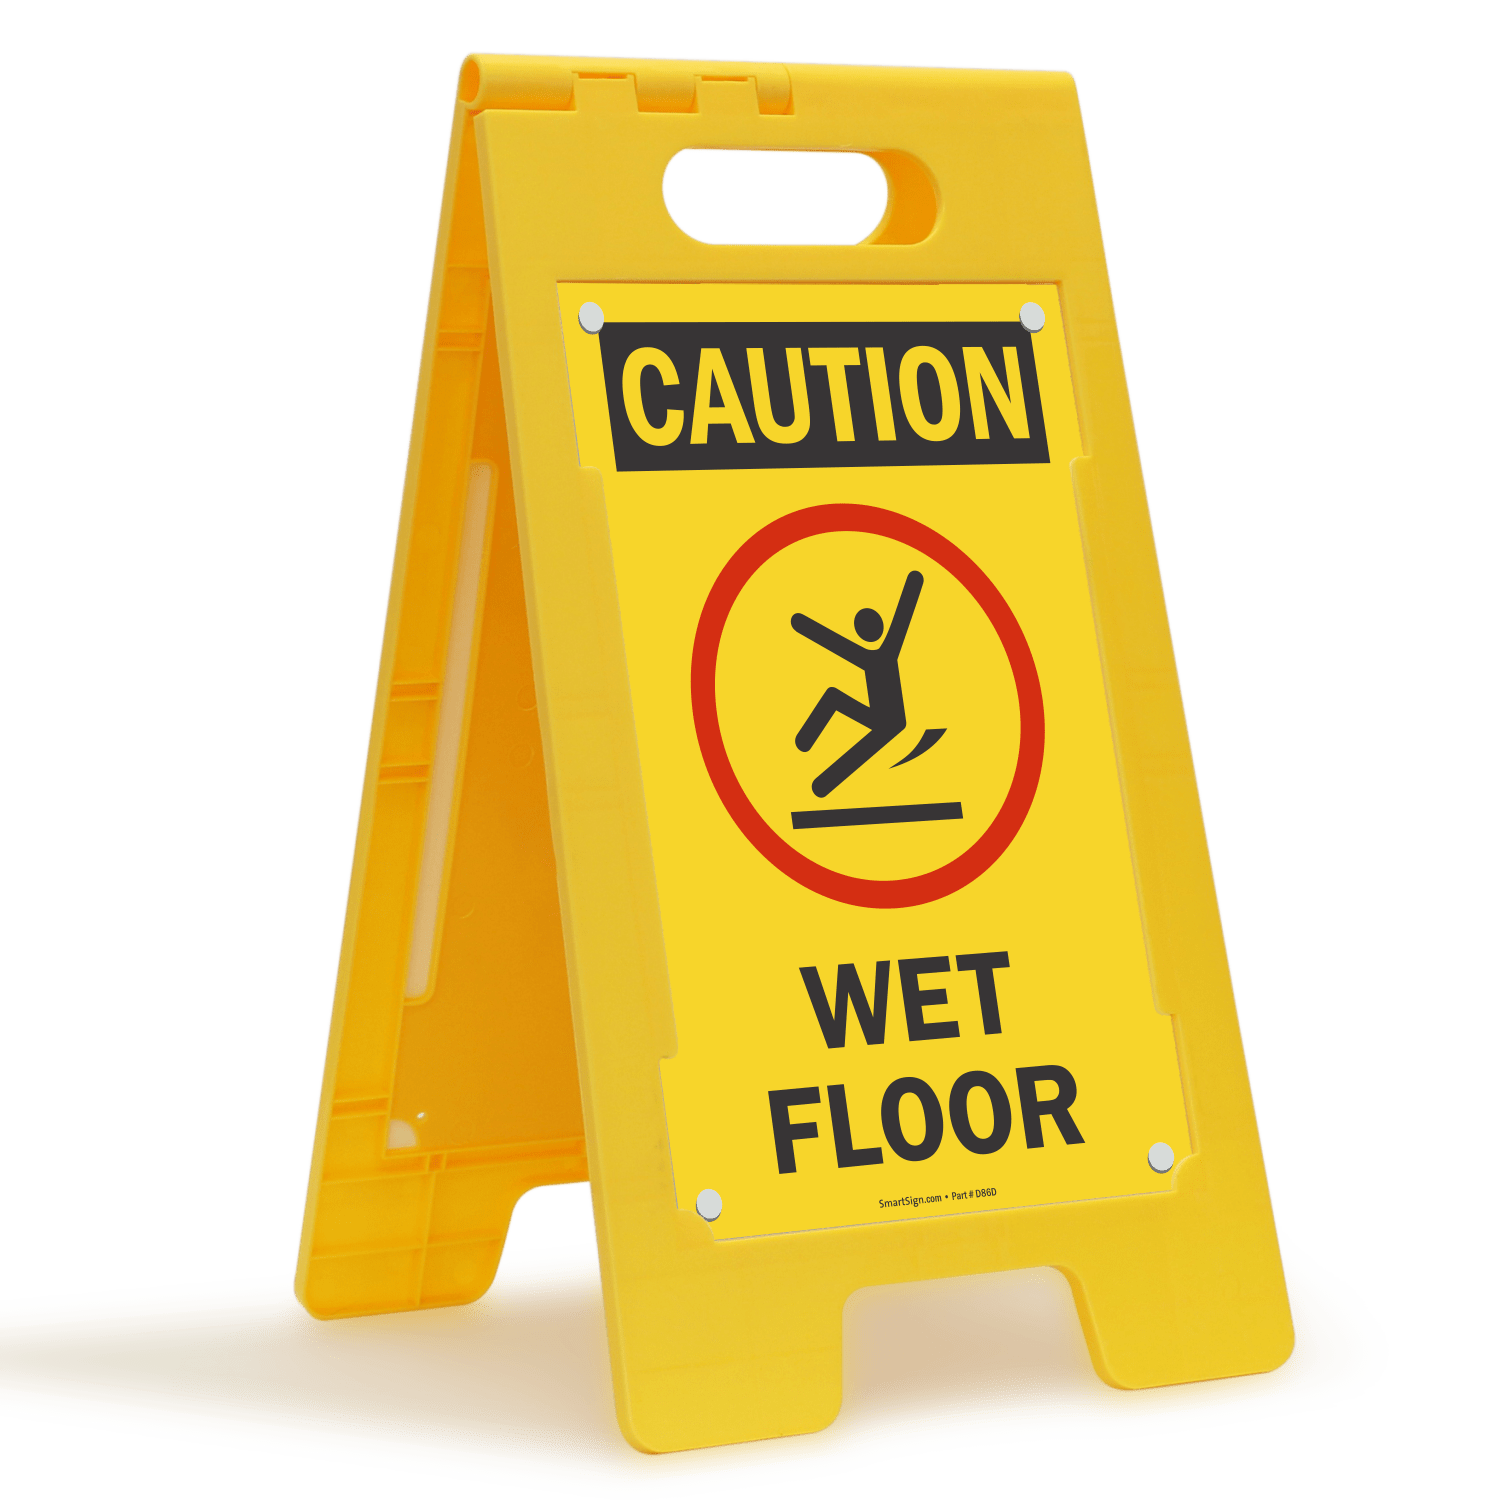 Wet Floor Caution 2-Sided Safety Sign | Supply Master | Accra, Ghana Janitorial & Cleaning Buy Tools hardware Building materials